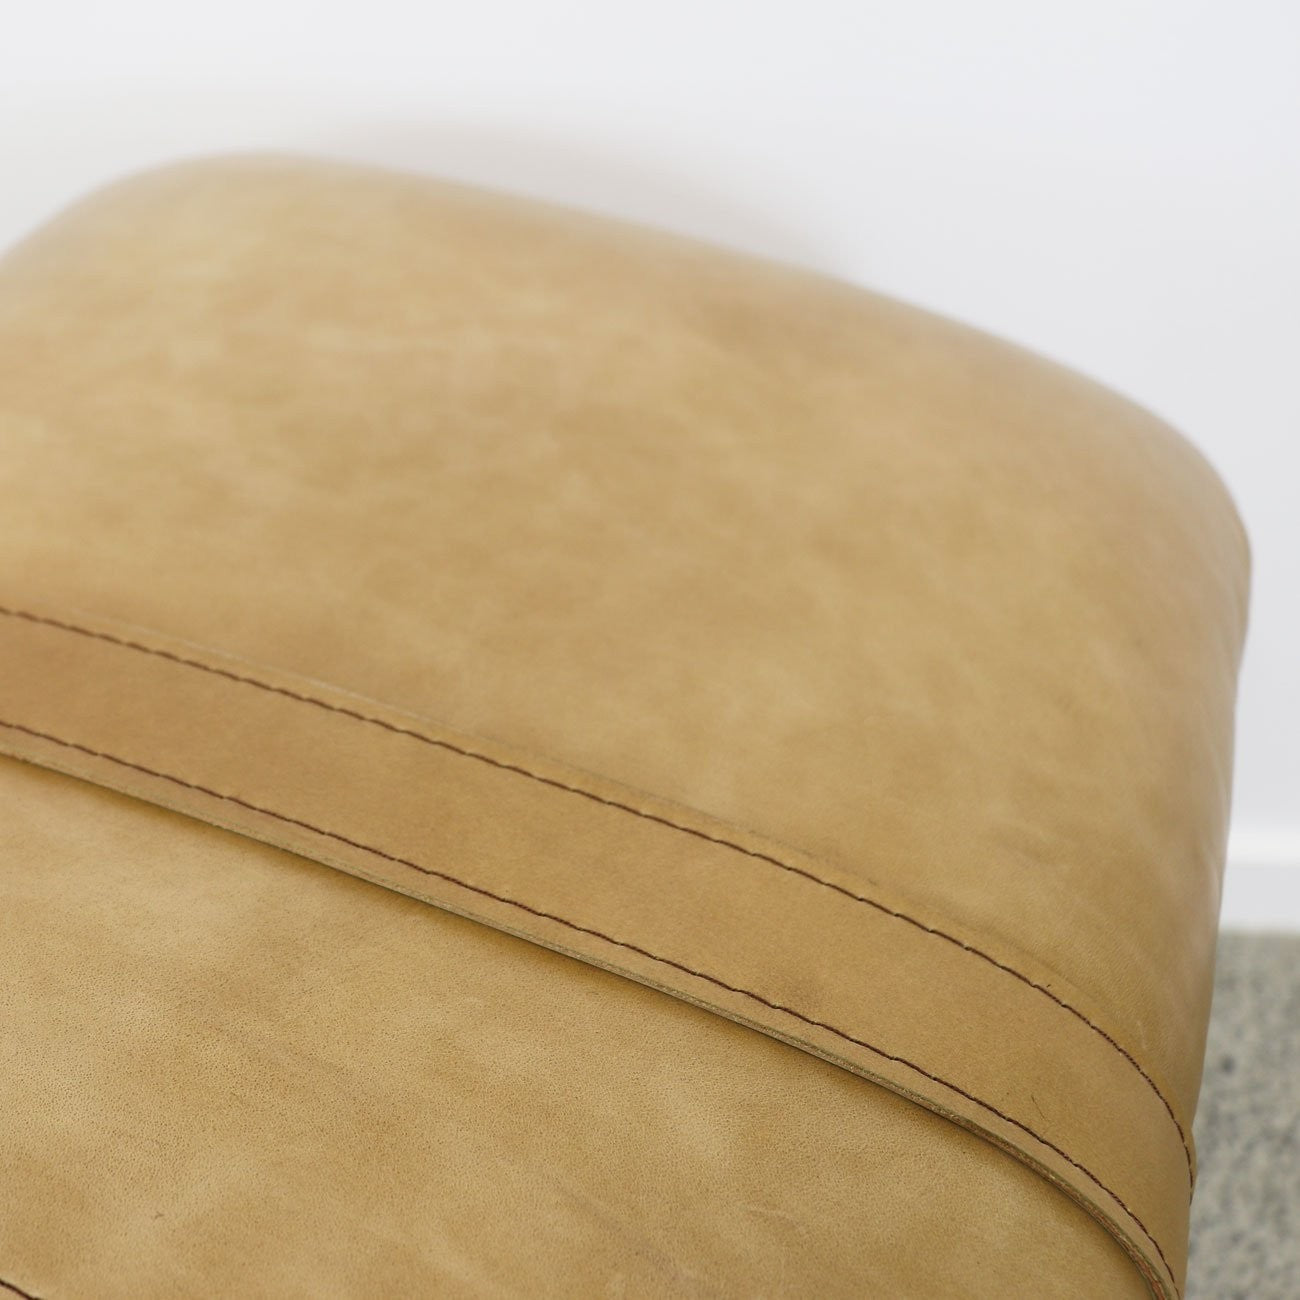 Bayley Leather Strap Ottoman/Bench - Tan Leather